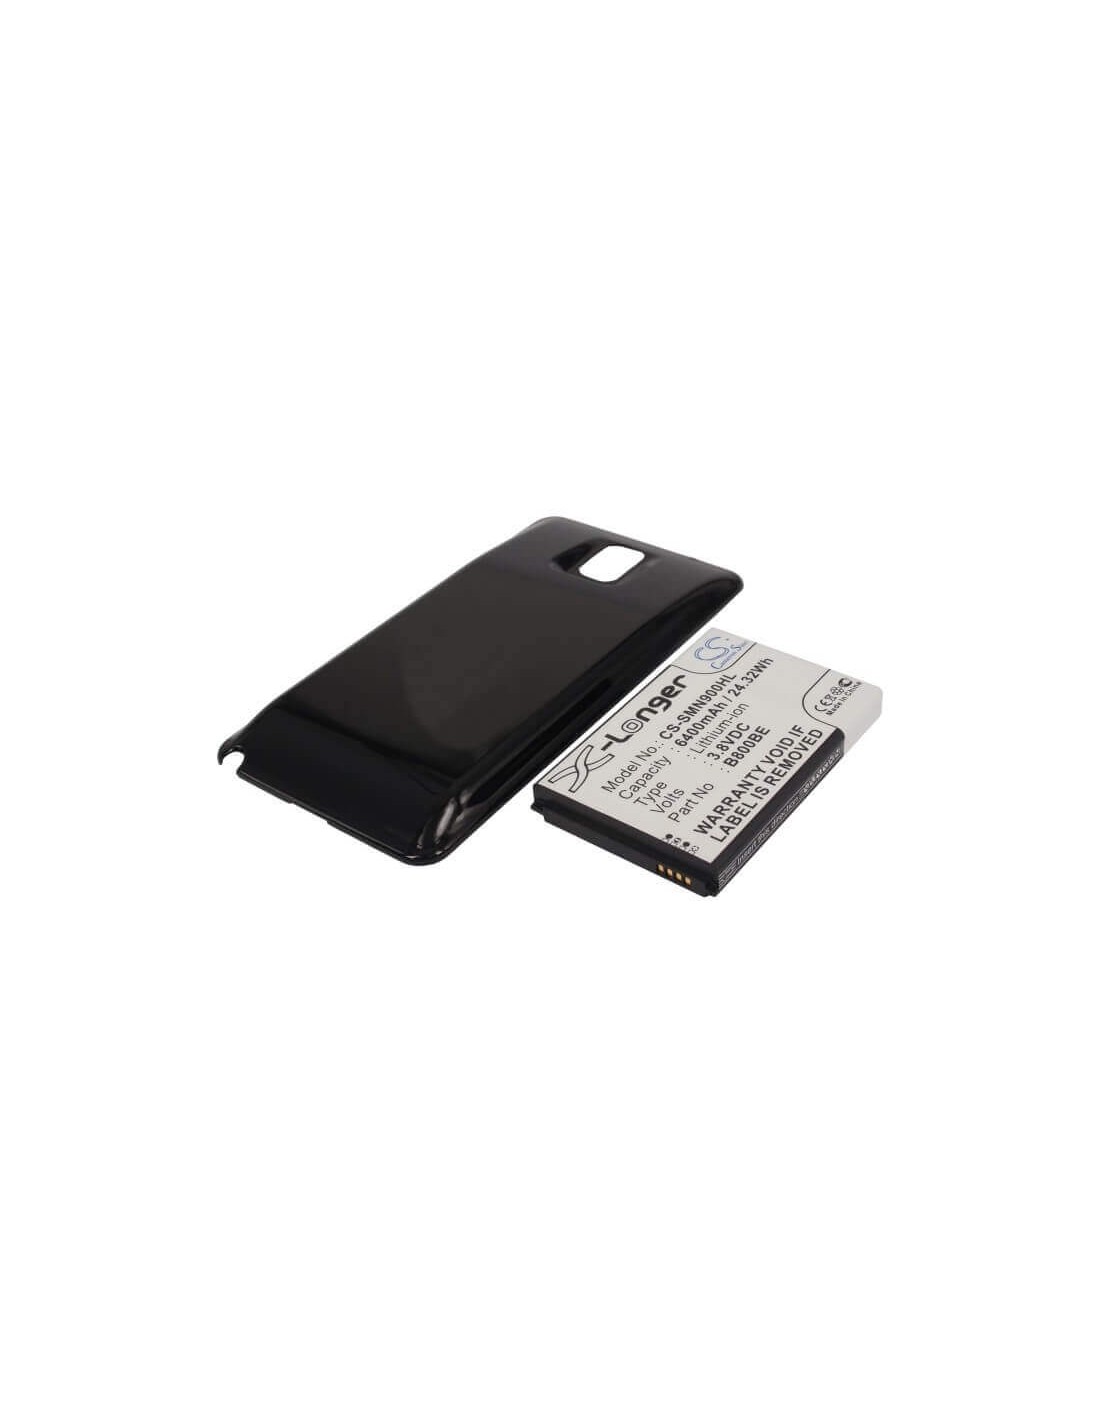 Battery for Samsung SM-N900, SM-N9005, Galaxy Note 3, black cover 3.8V, 6400mAh - 24.32Wh